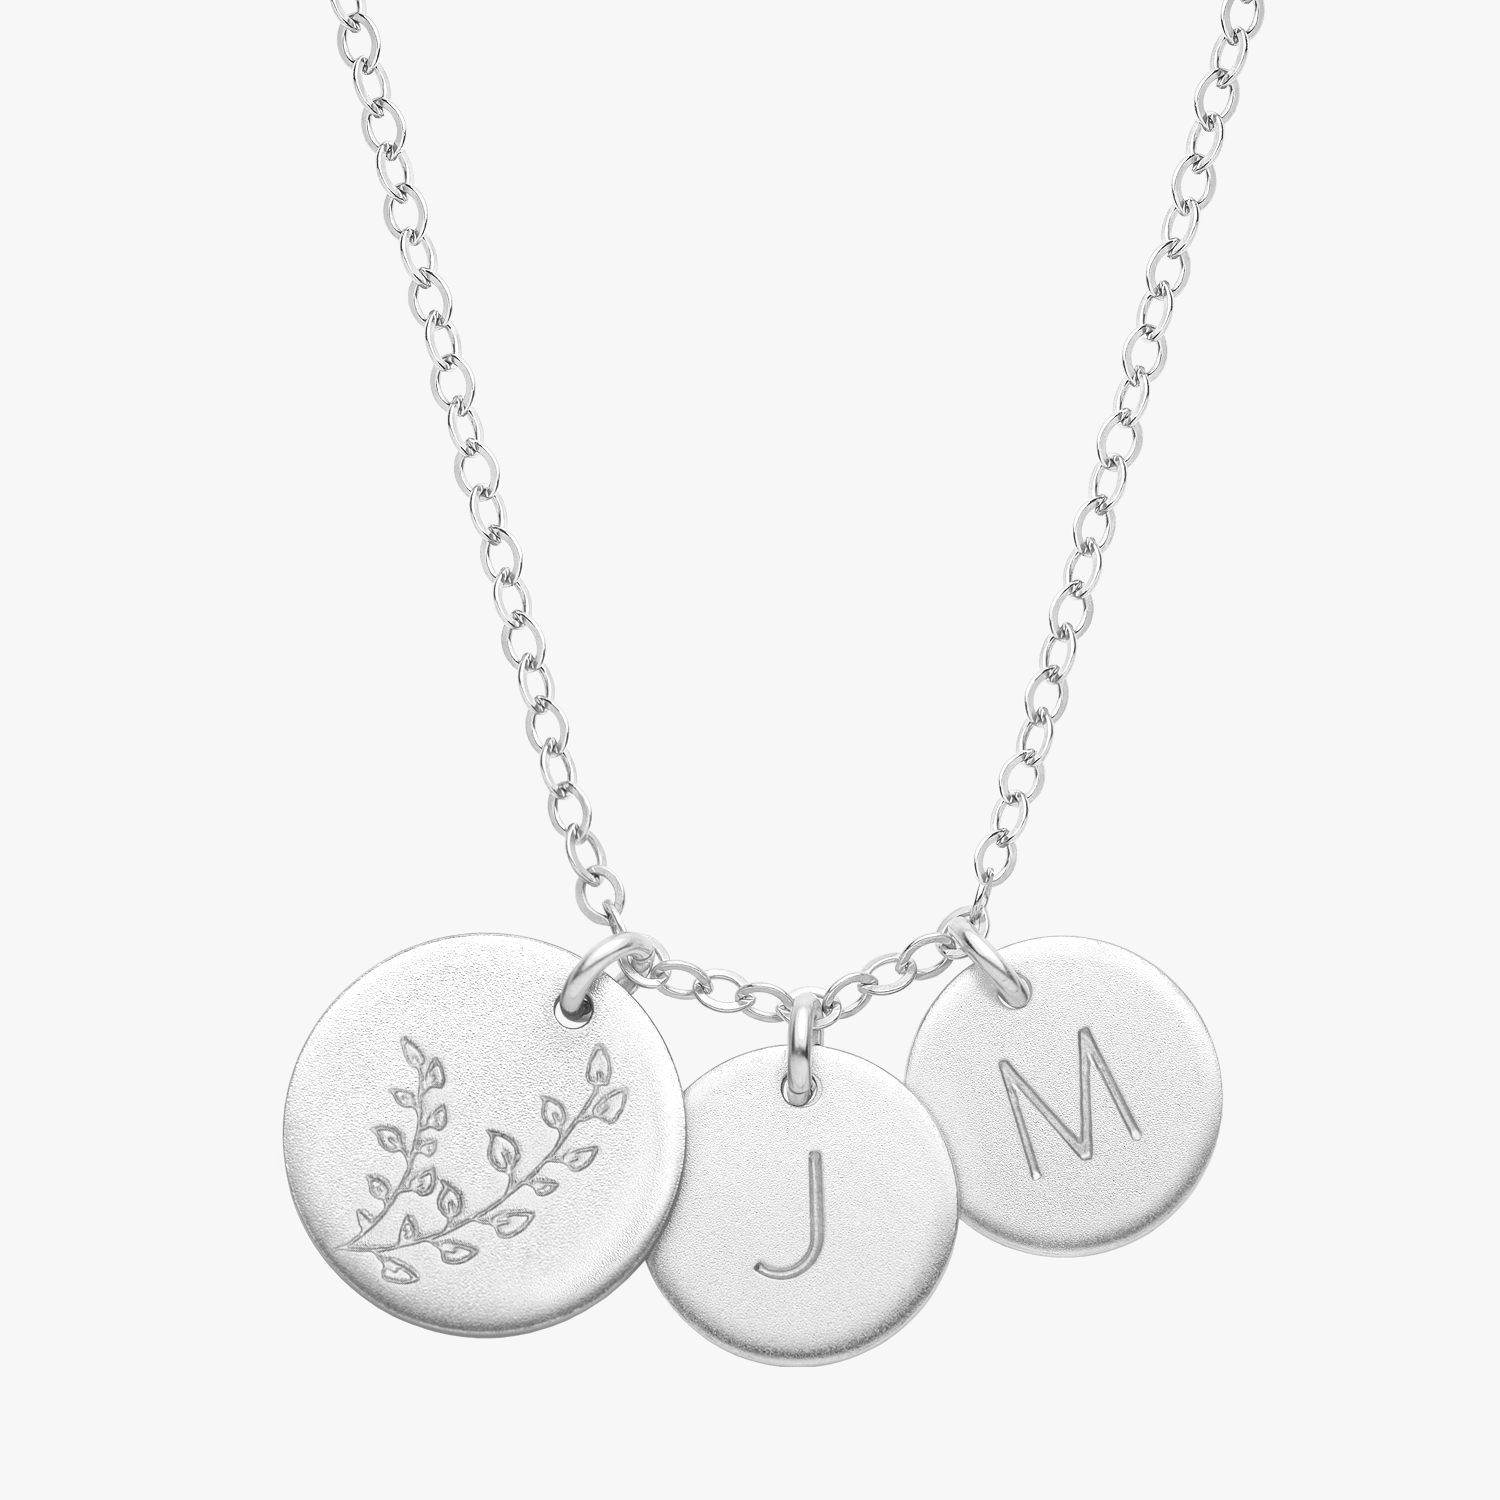 Personalized Flower Initial Necklace Silver